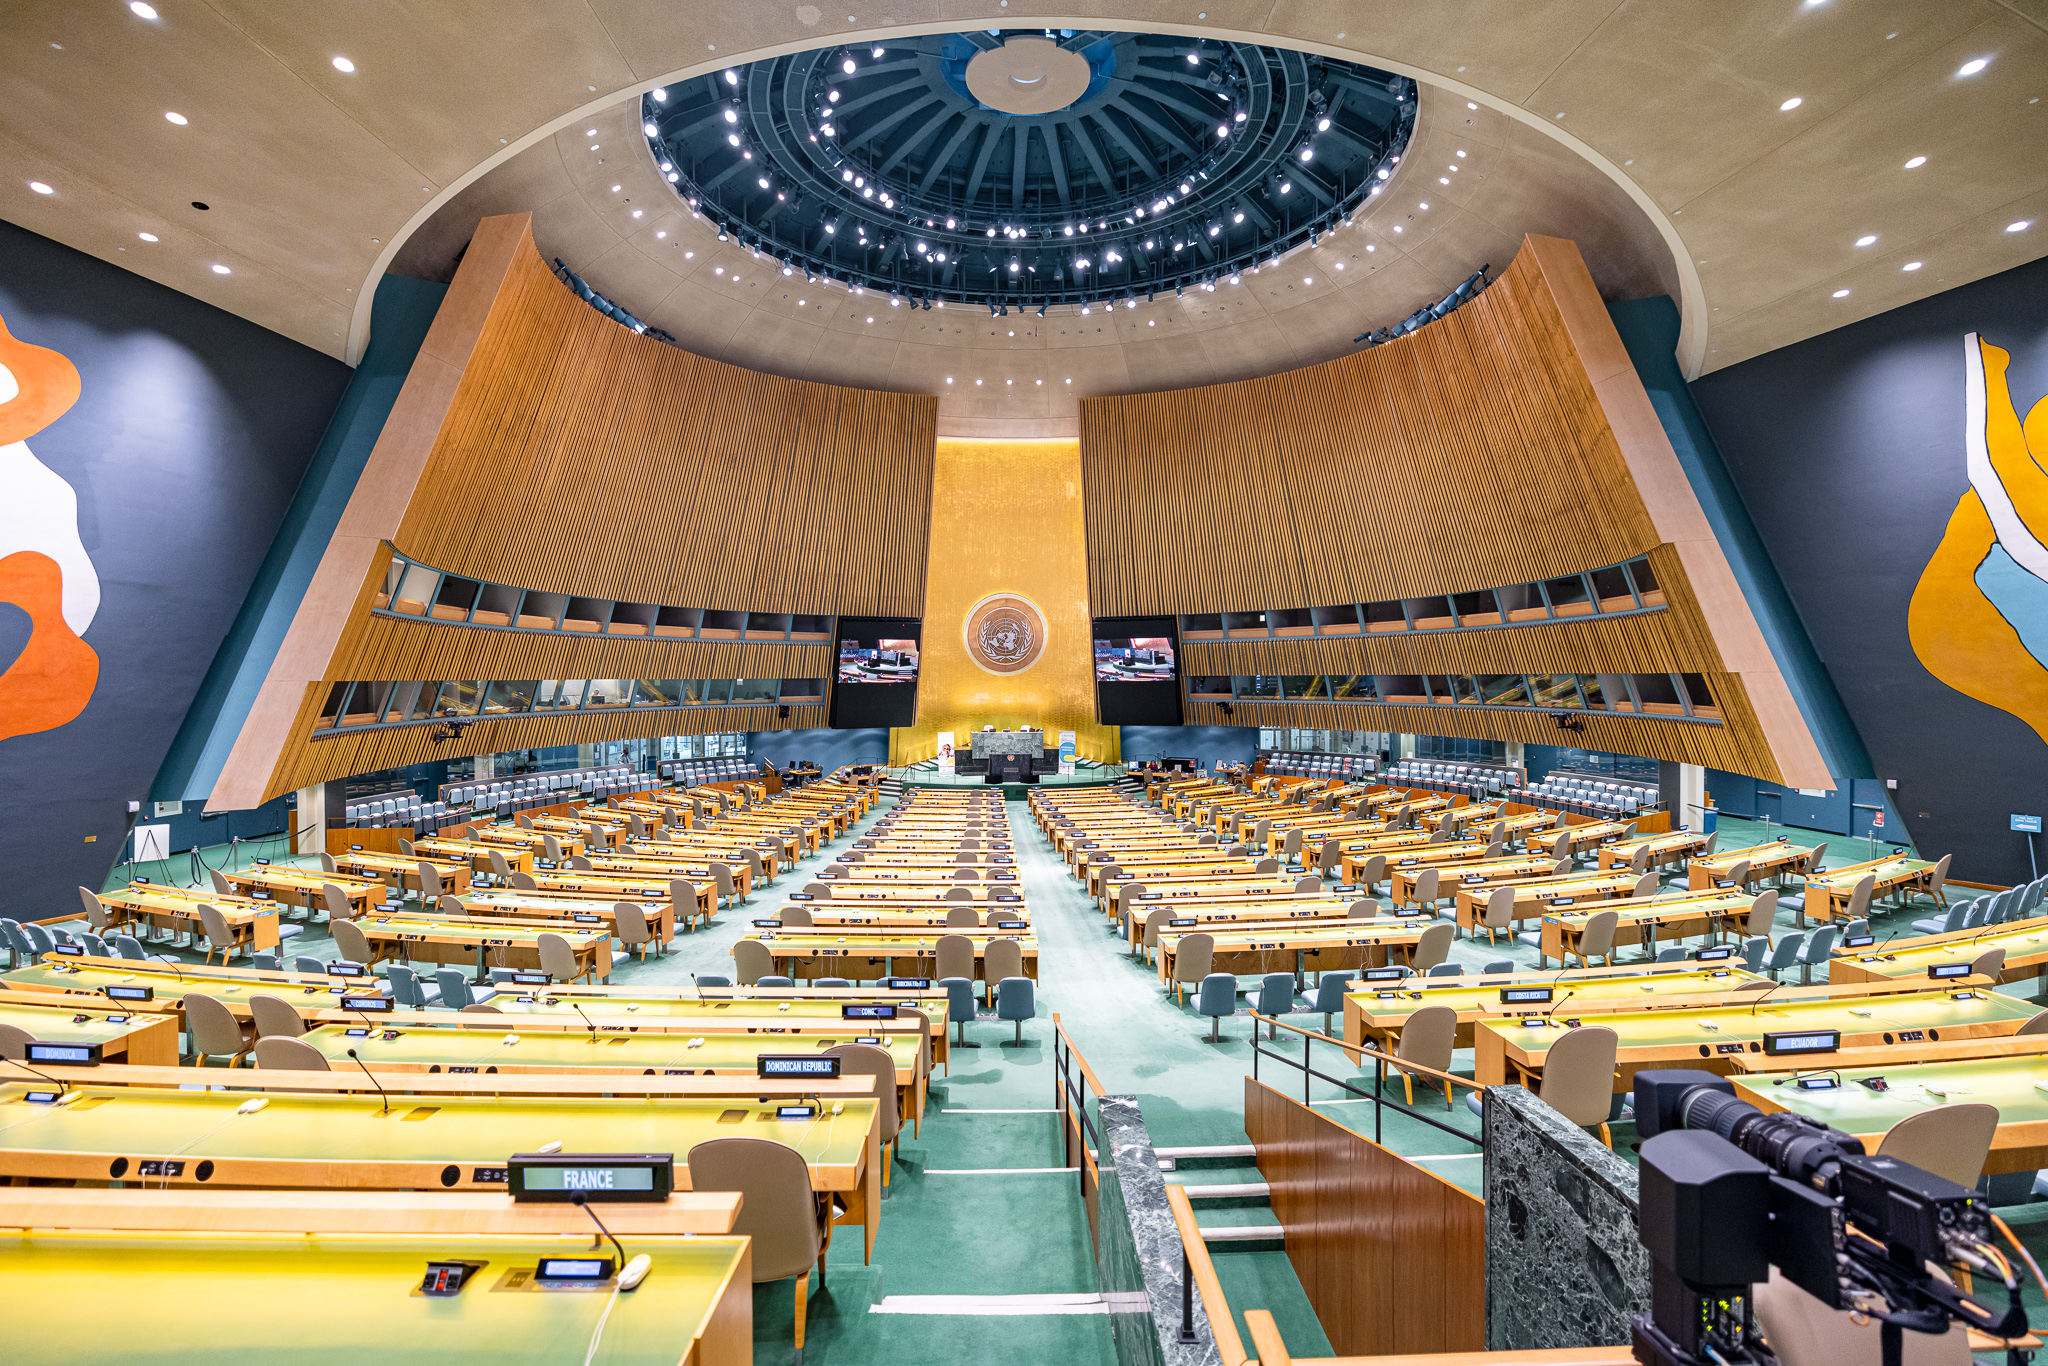 UN General Assembly set to vote on immediate ceasefire in Gaza crisis